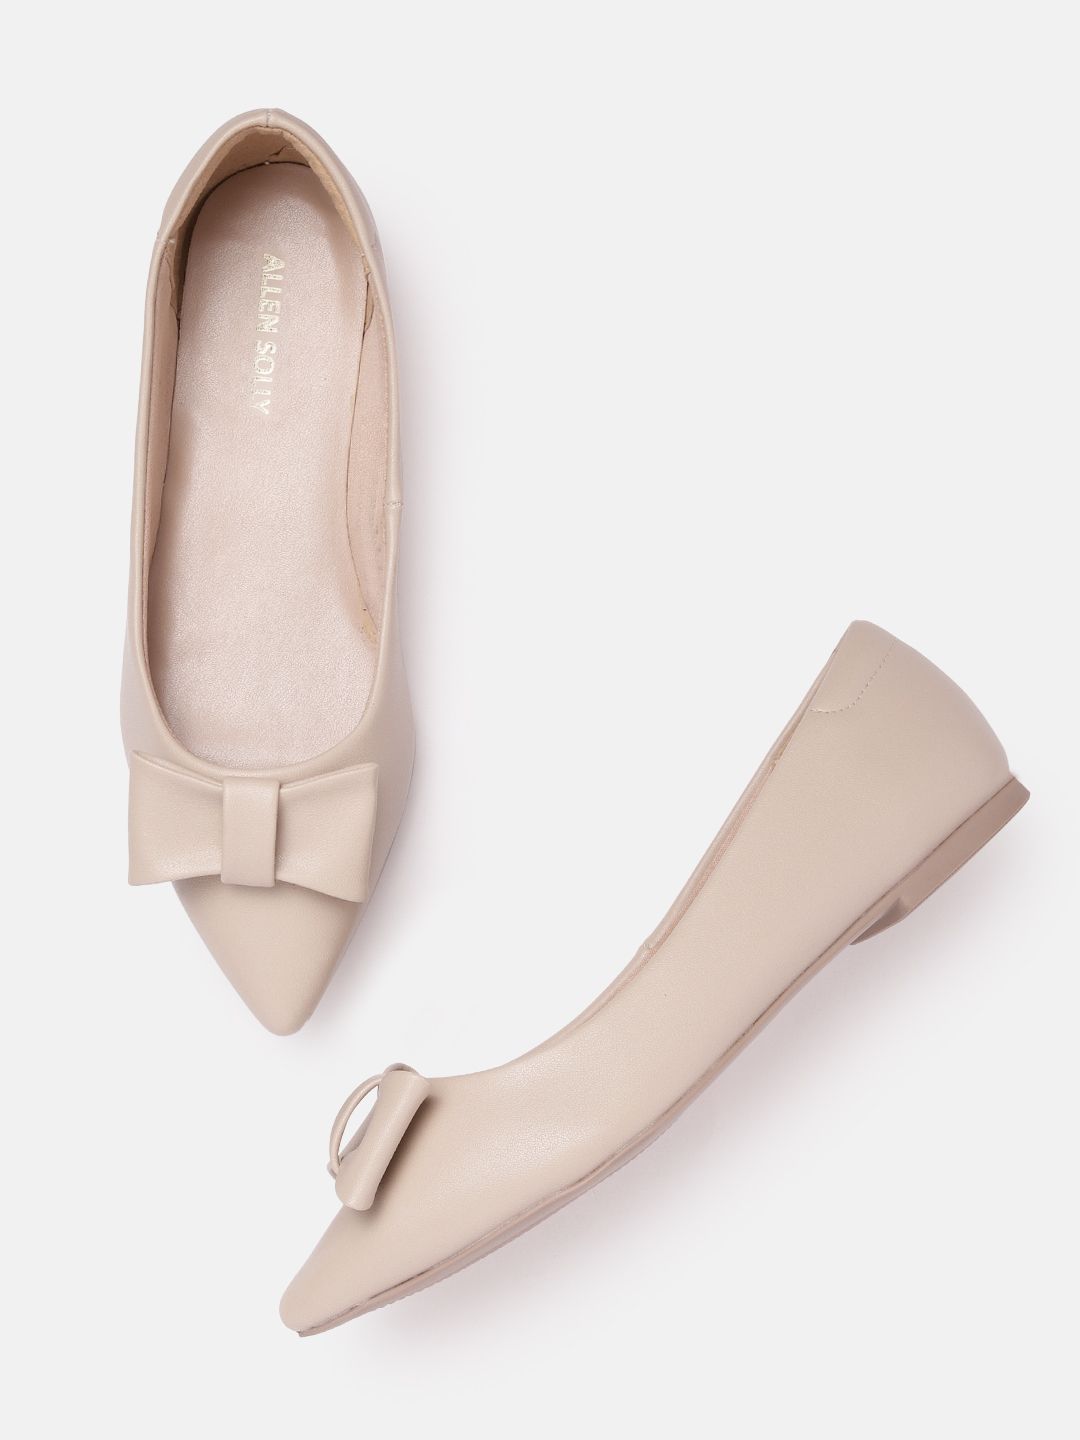 Allen Solly Women Ballerinas with Bow Detail Price in India